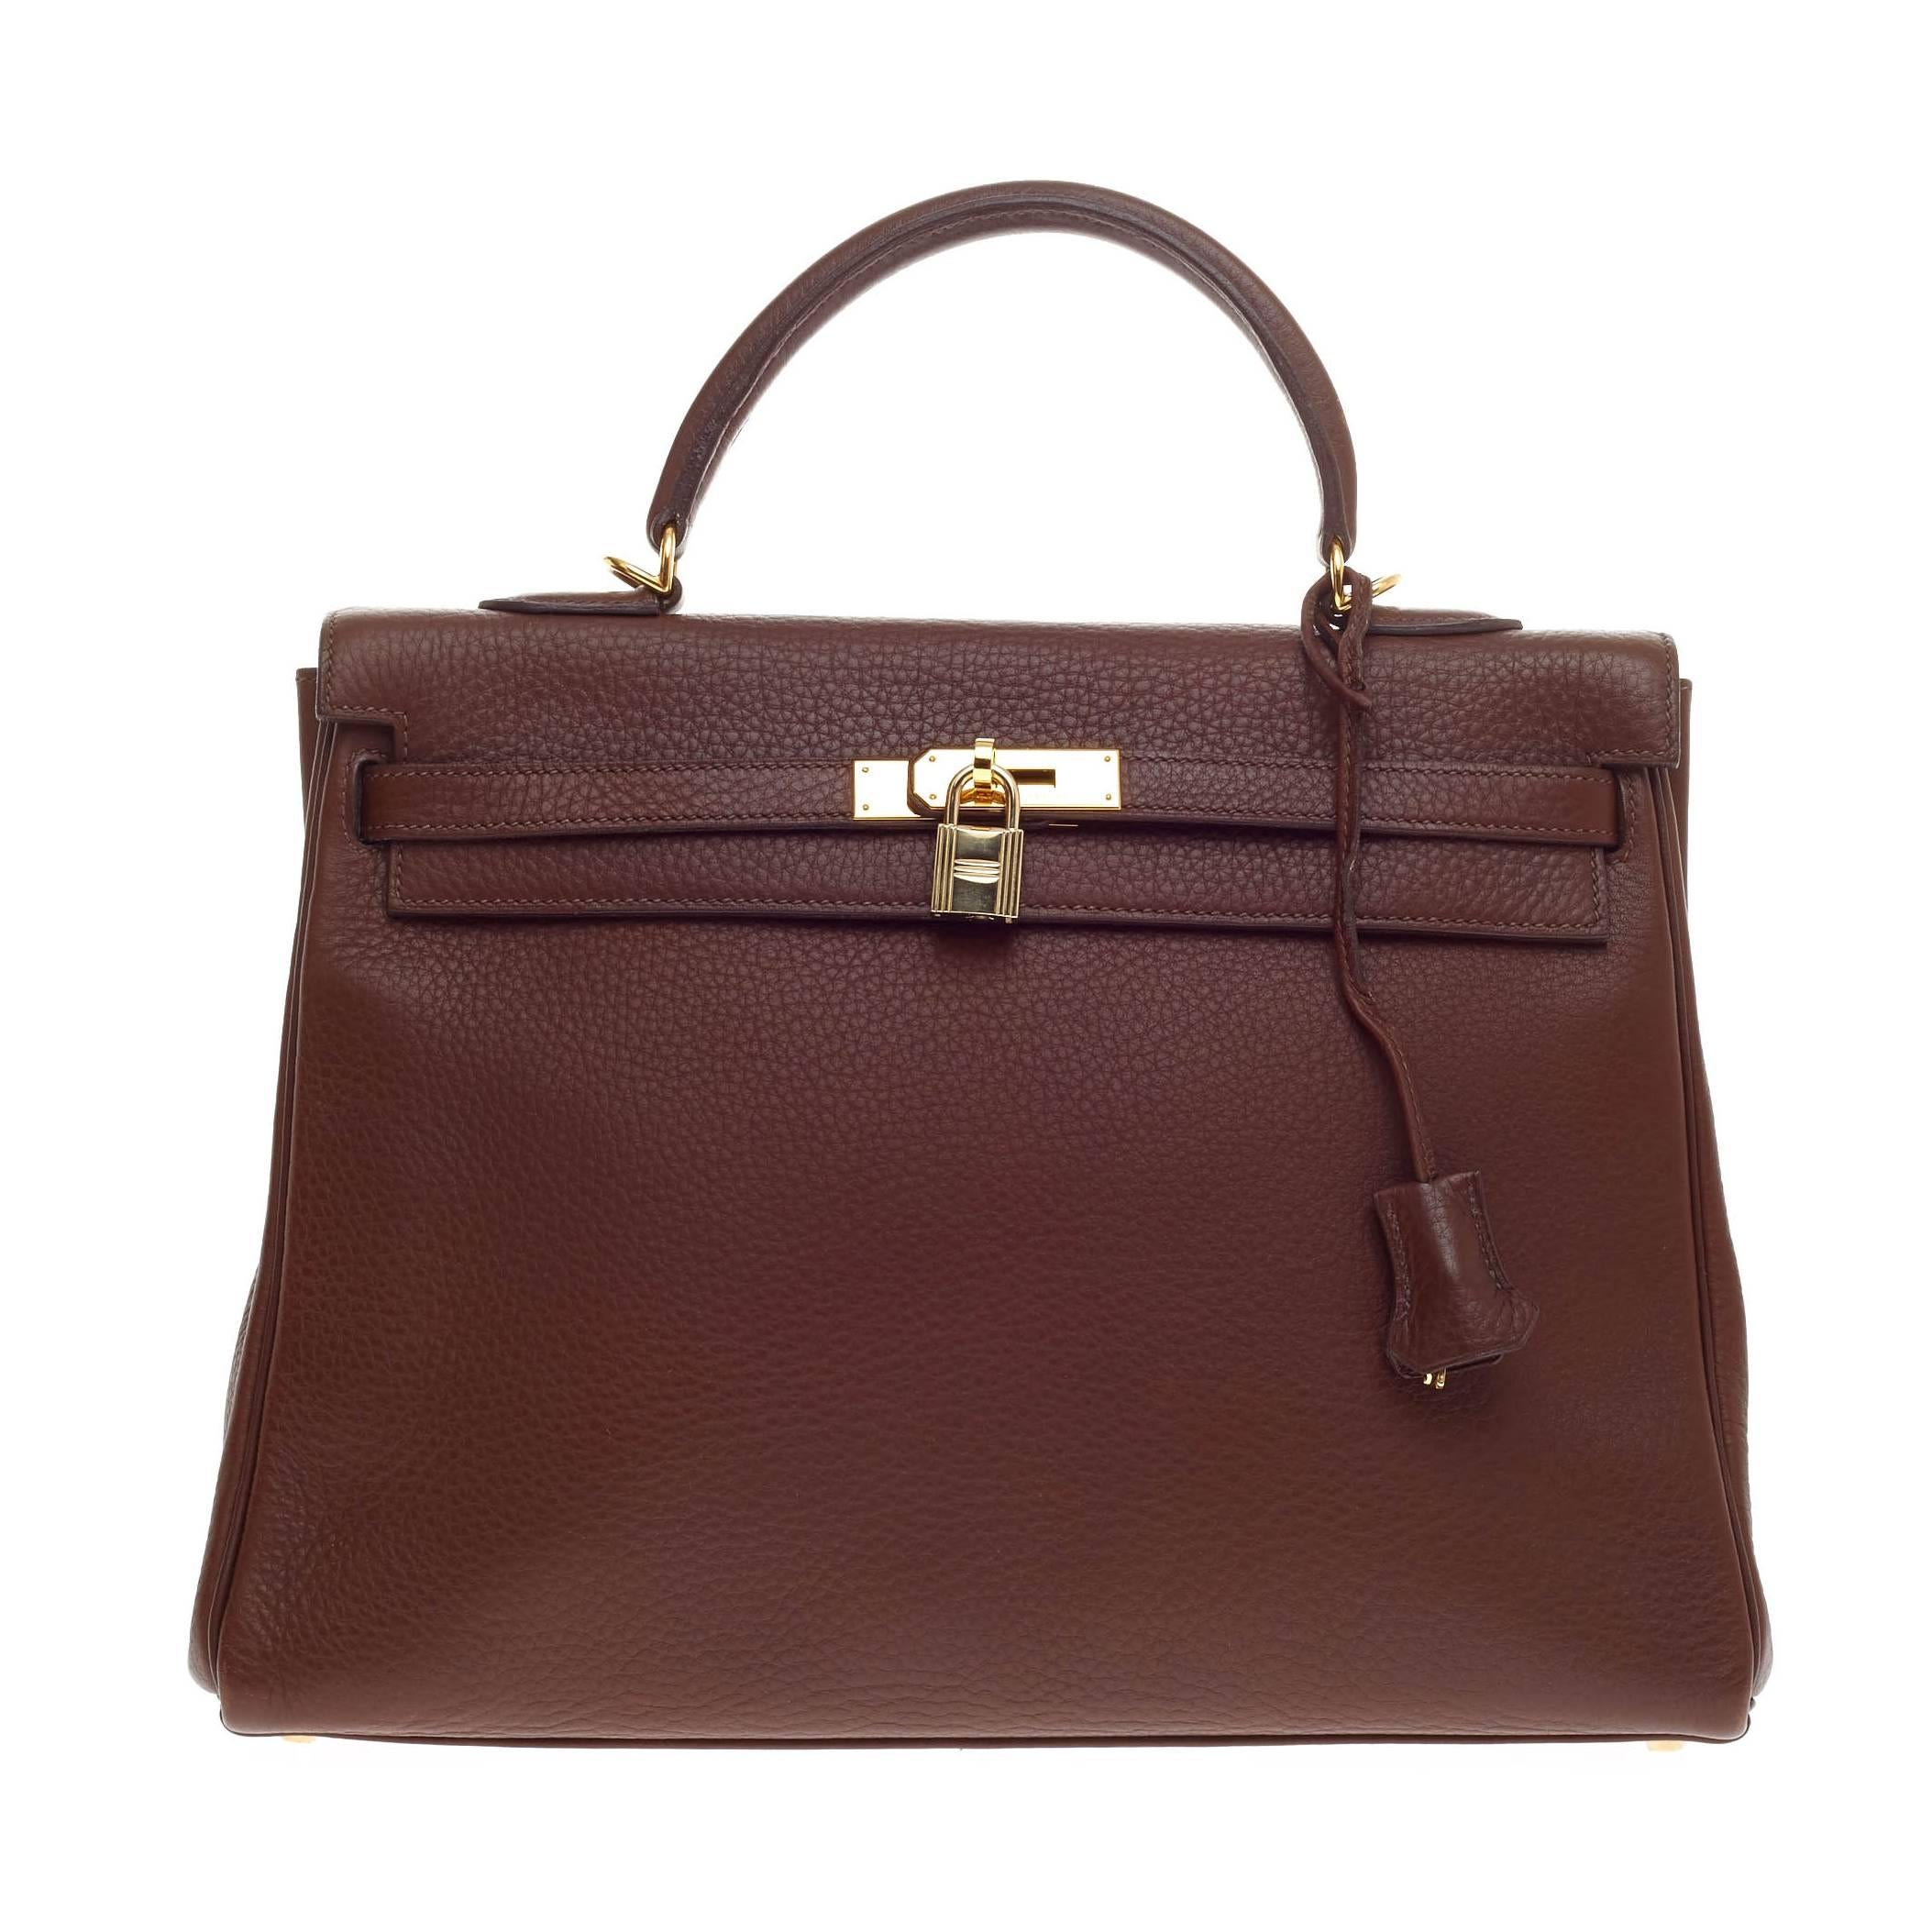 Hermes Kelly Chocolate Clemence with Gold Hardware 35